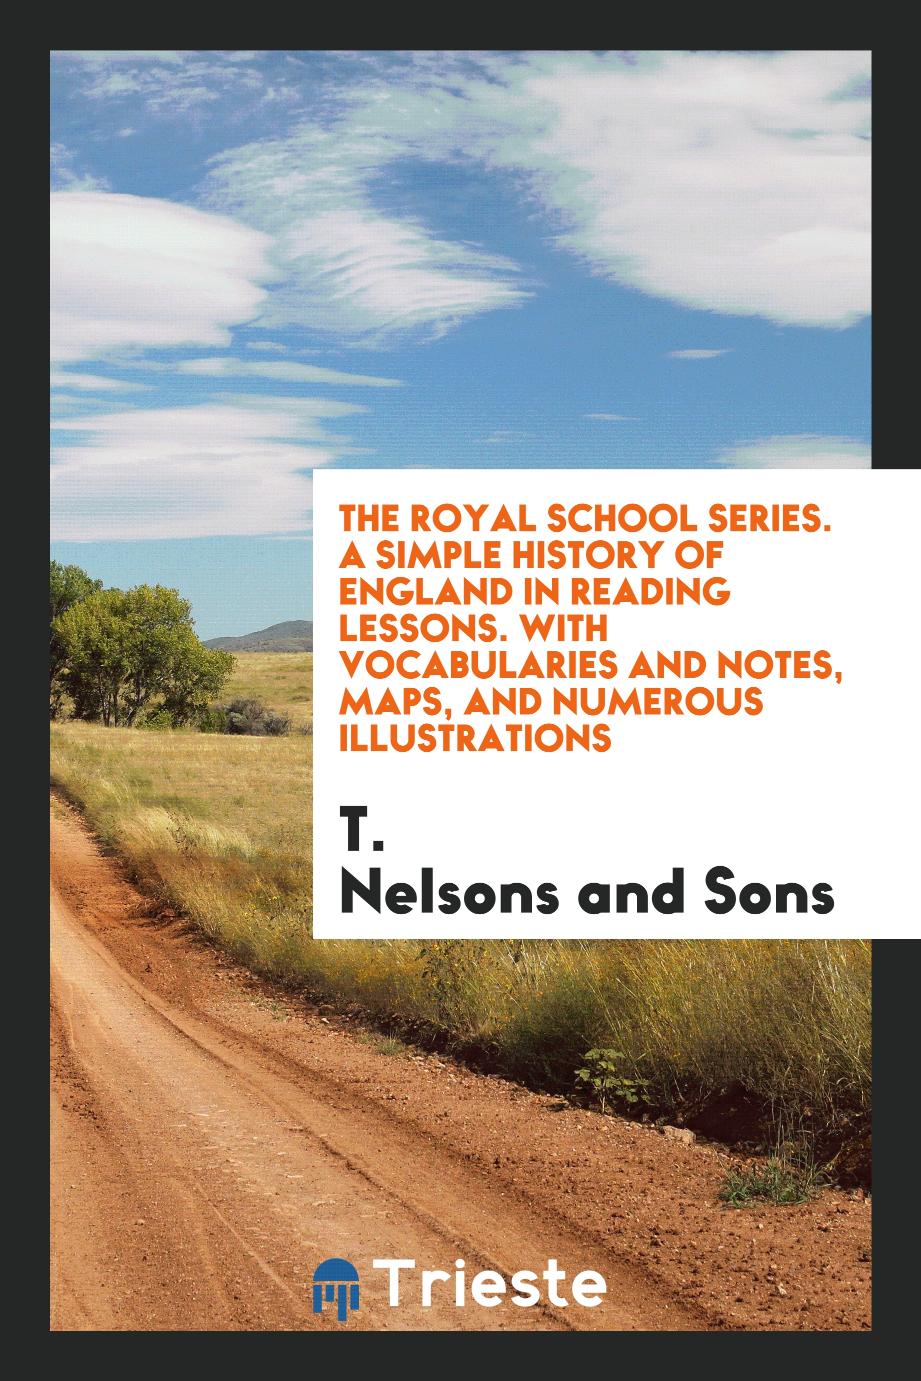 The Royal School Series. A Simple History of England in Reading Lessons. With Vocabularies and Notes, Maps, and Numerous Illustrations